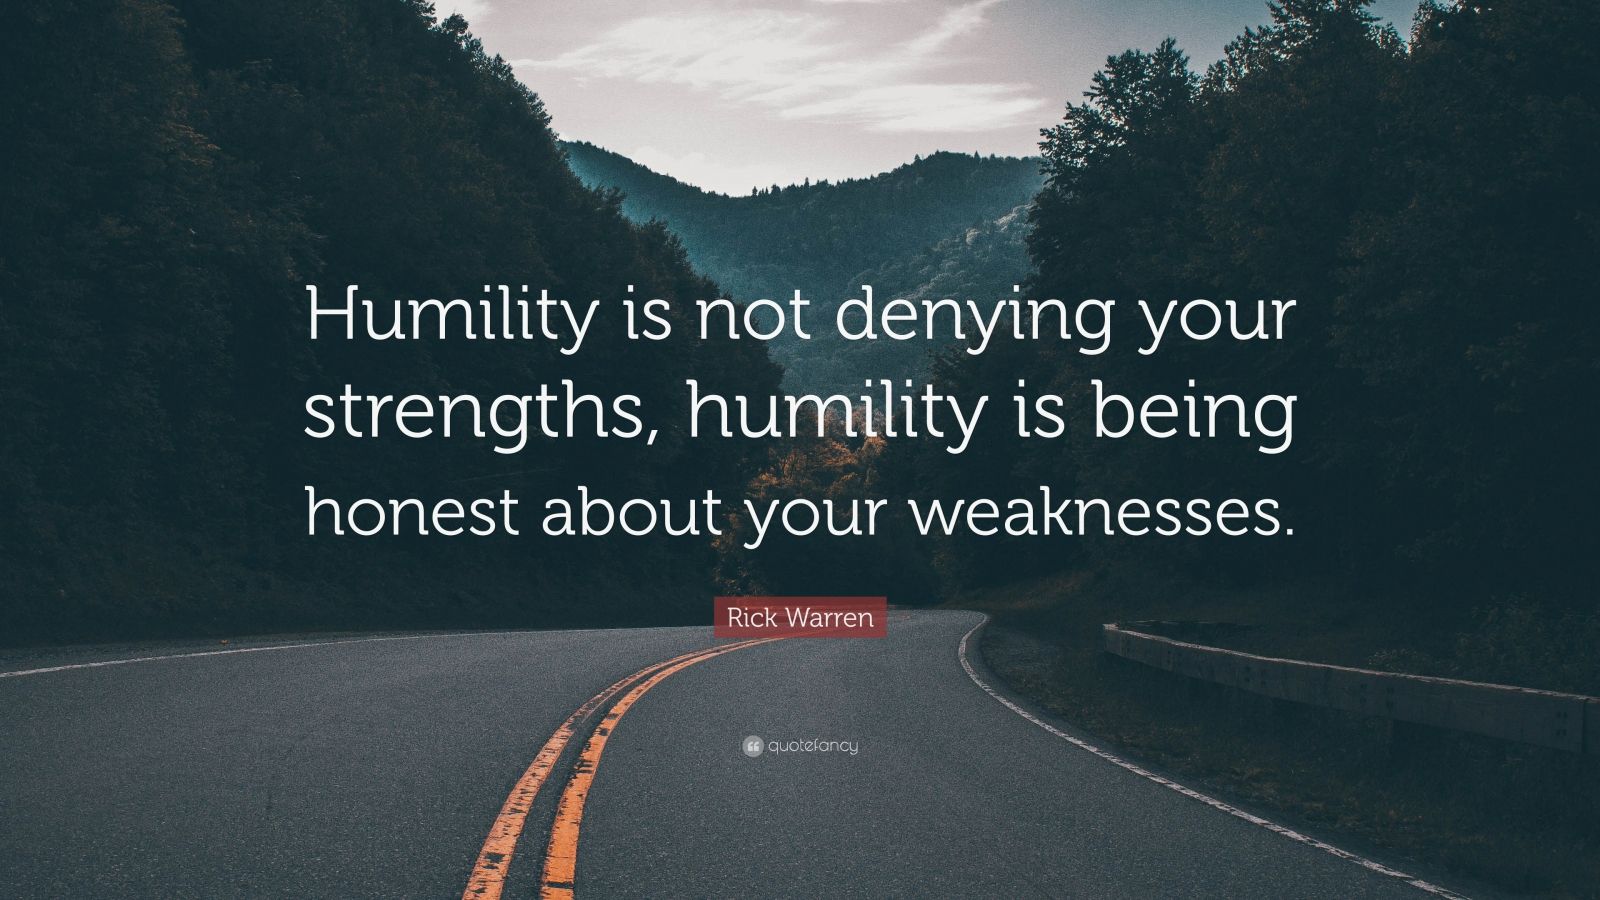 Rick Warren Quote: “Humility is not denying your strengths, humility is ...